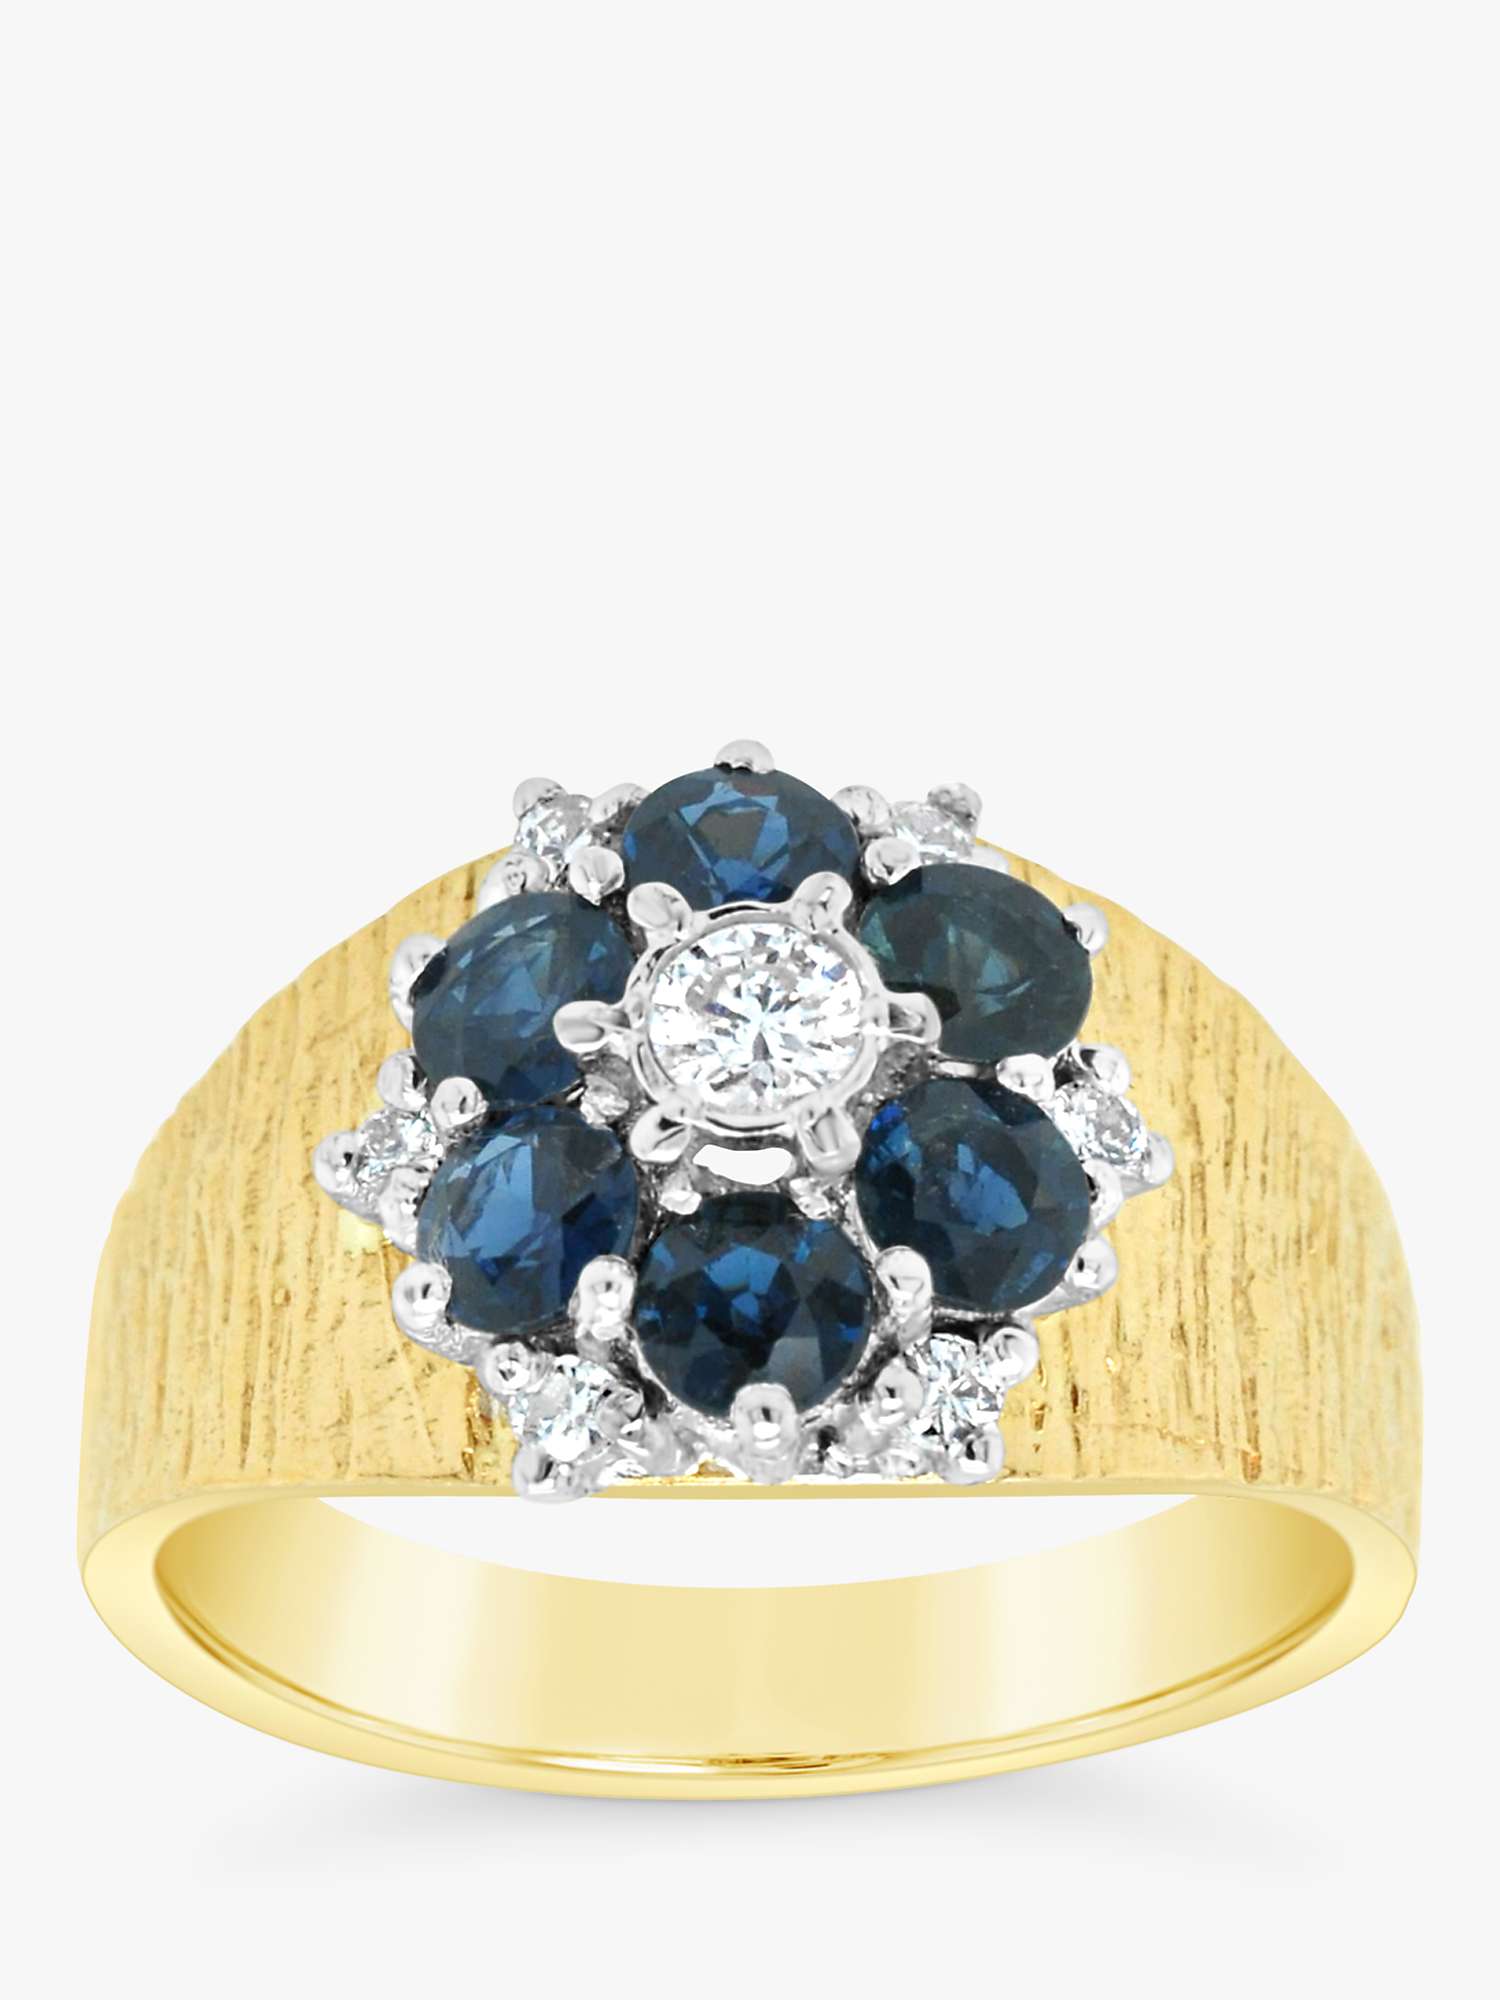 Buy Milton & Humble Jewellery Second Hand 18ct White & Yellow Gold Sapphire & Diamond Floral Cluster Ring, Dated London 1978 Online at johnlewis.com